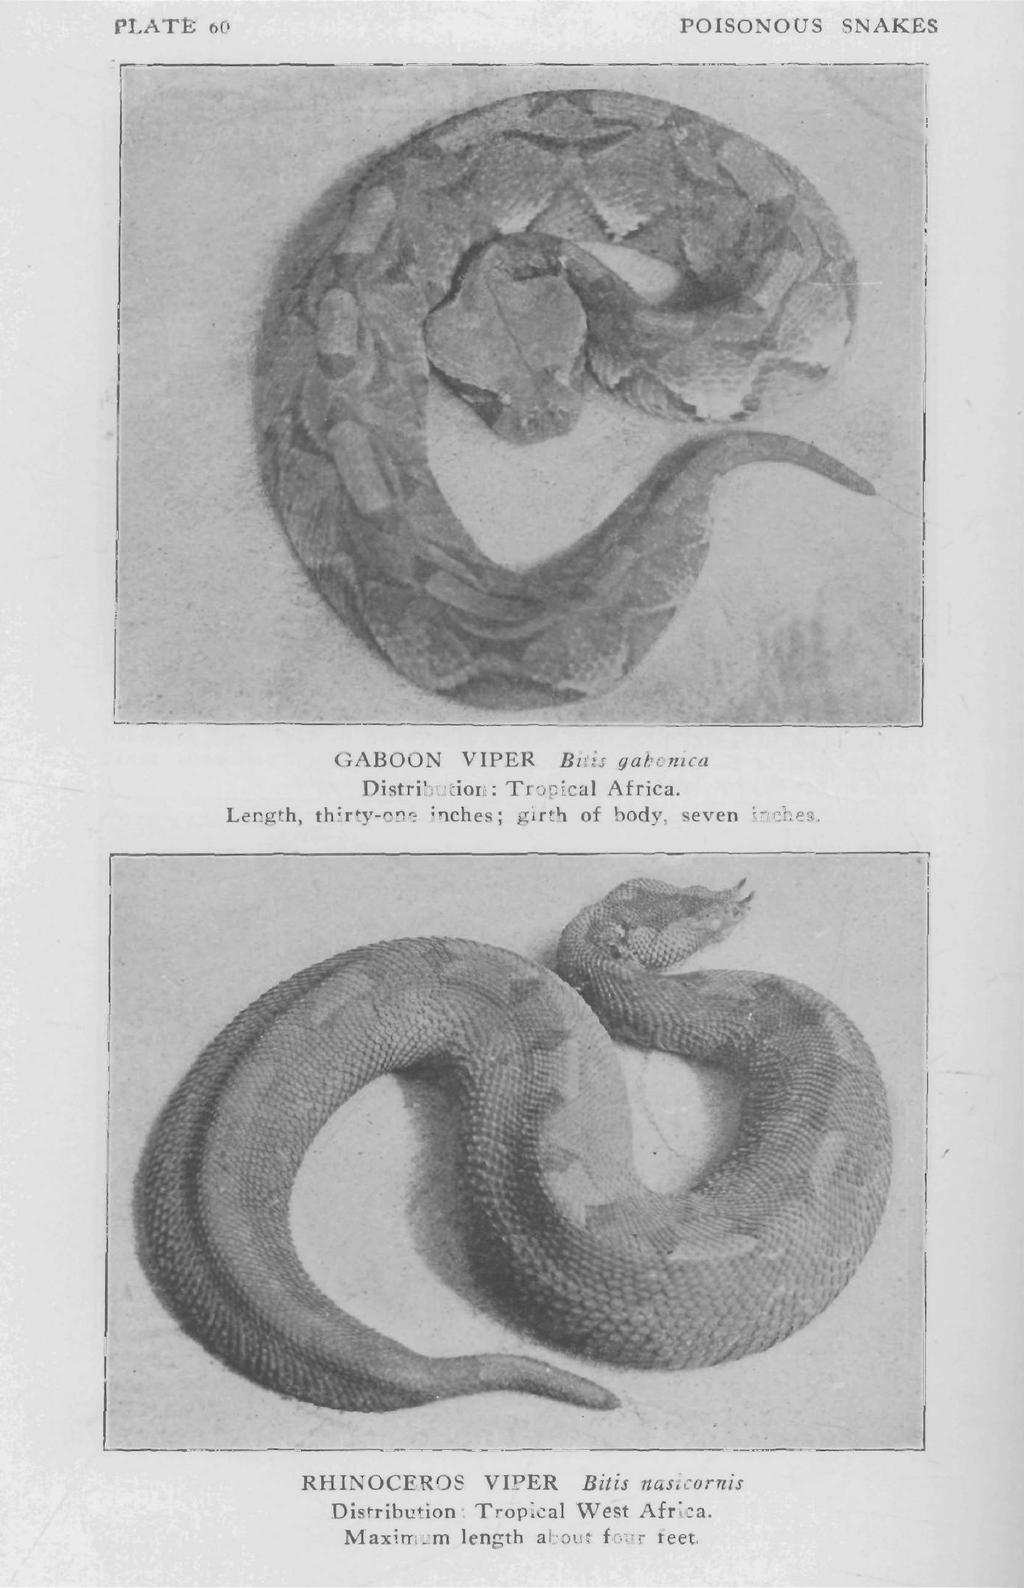 PLATE; 60 POISONOUS SNAKES GABOON VIPER Bitis gabonica Distribution: Tropical Africa.